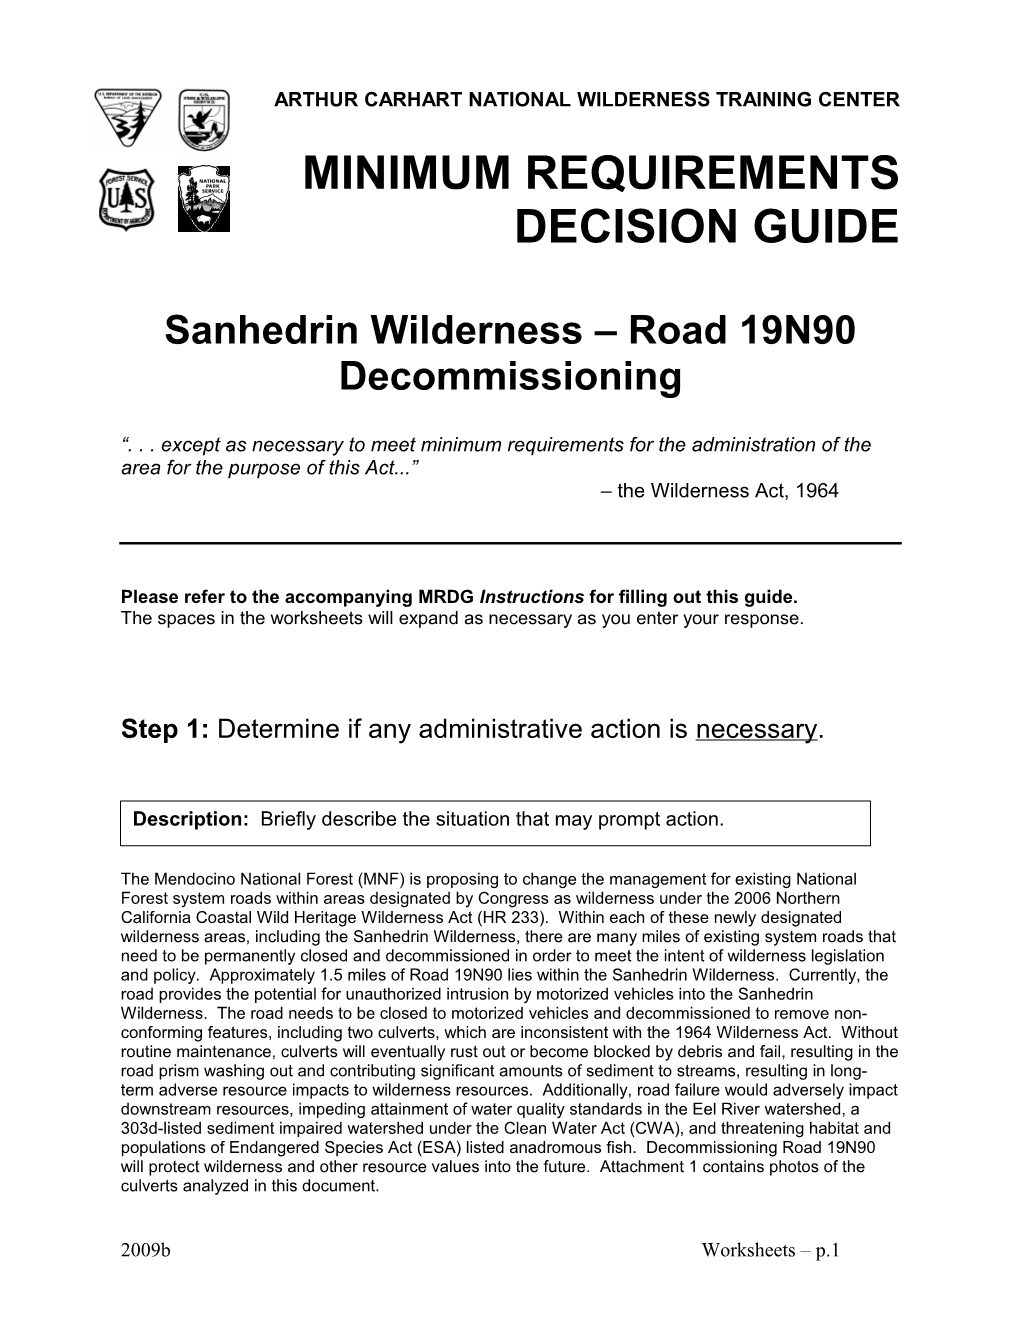 Minimum Requirement Decision Guide Example - Sanhedrin Wilderness Road 19N90 Decommissioning